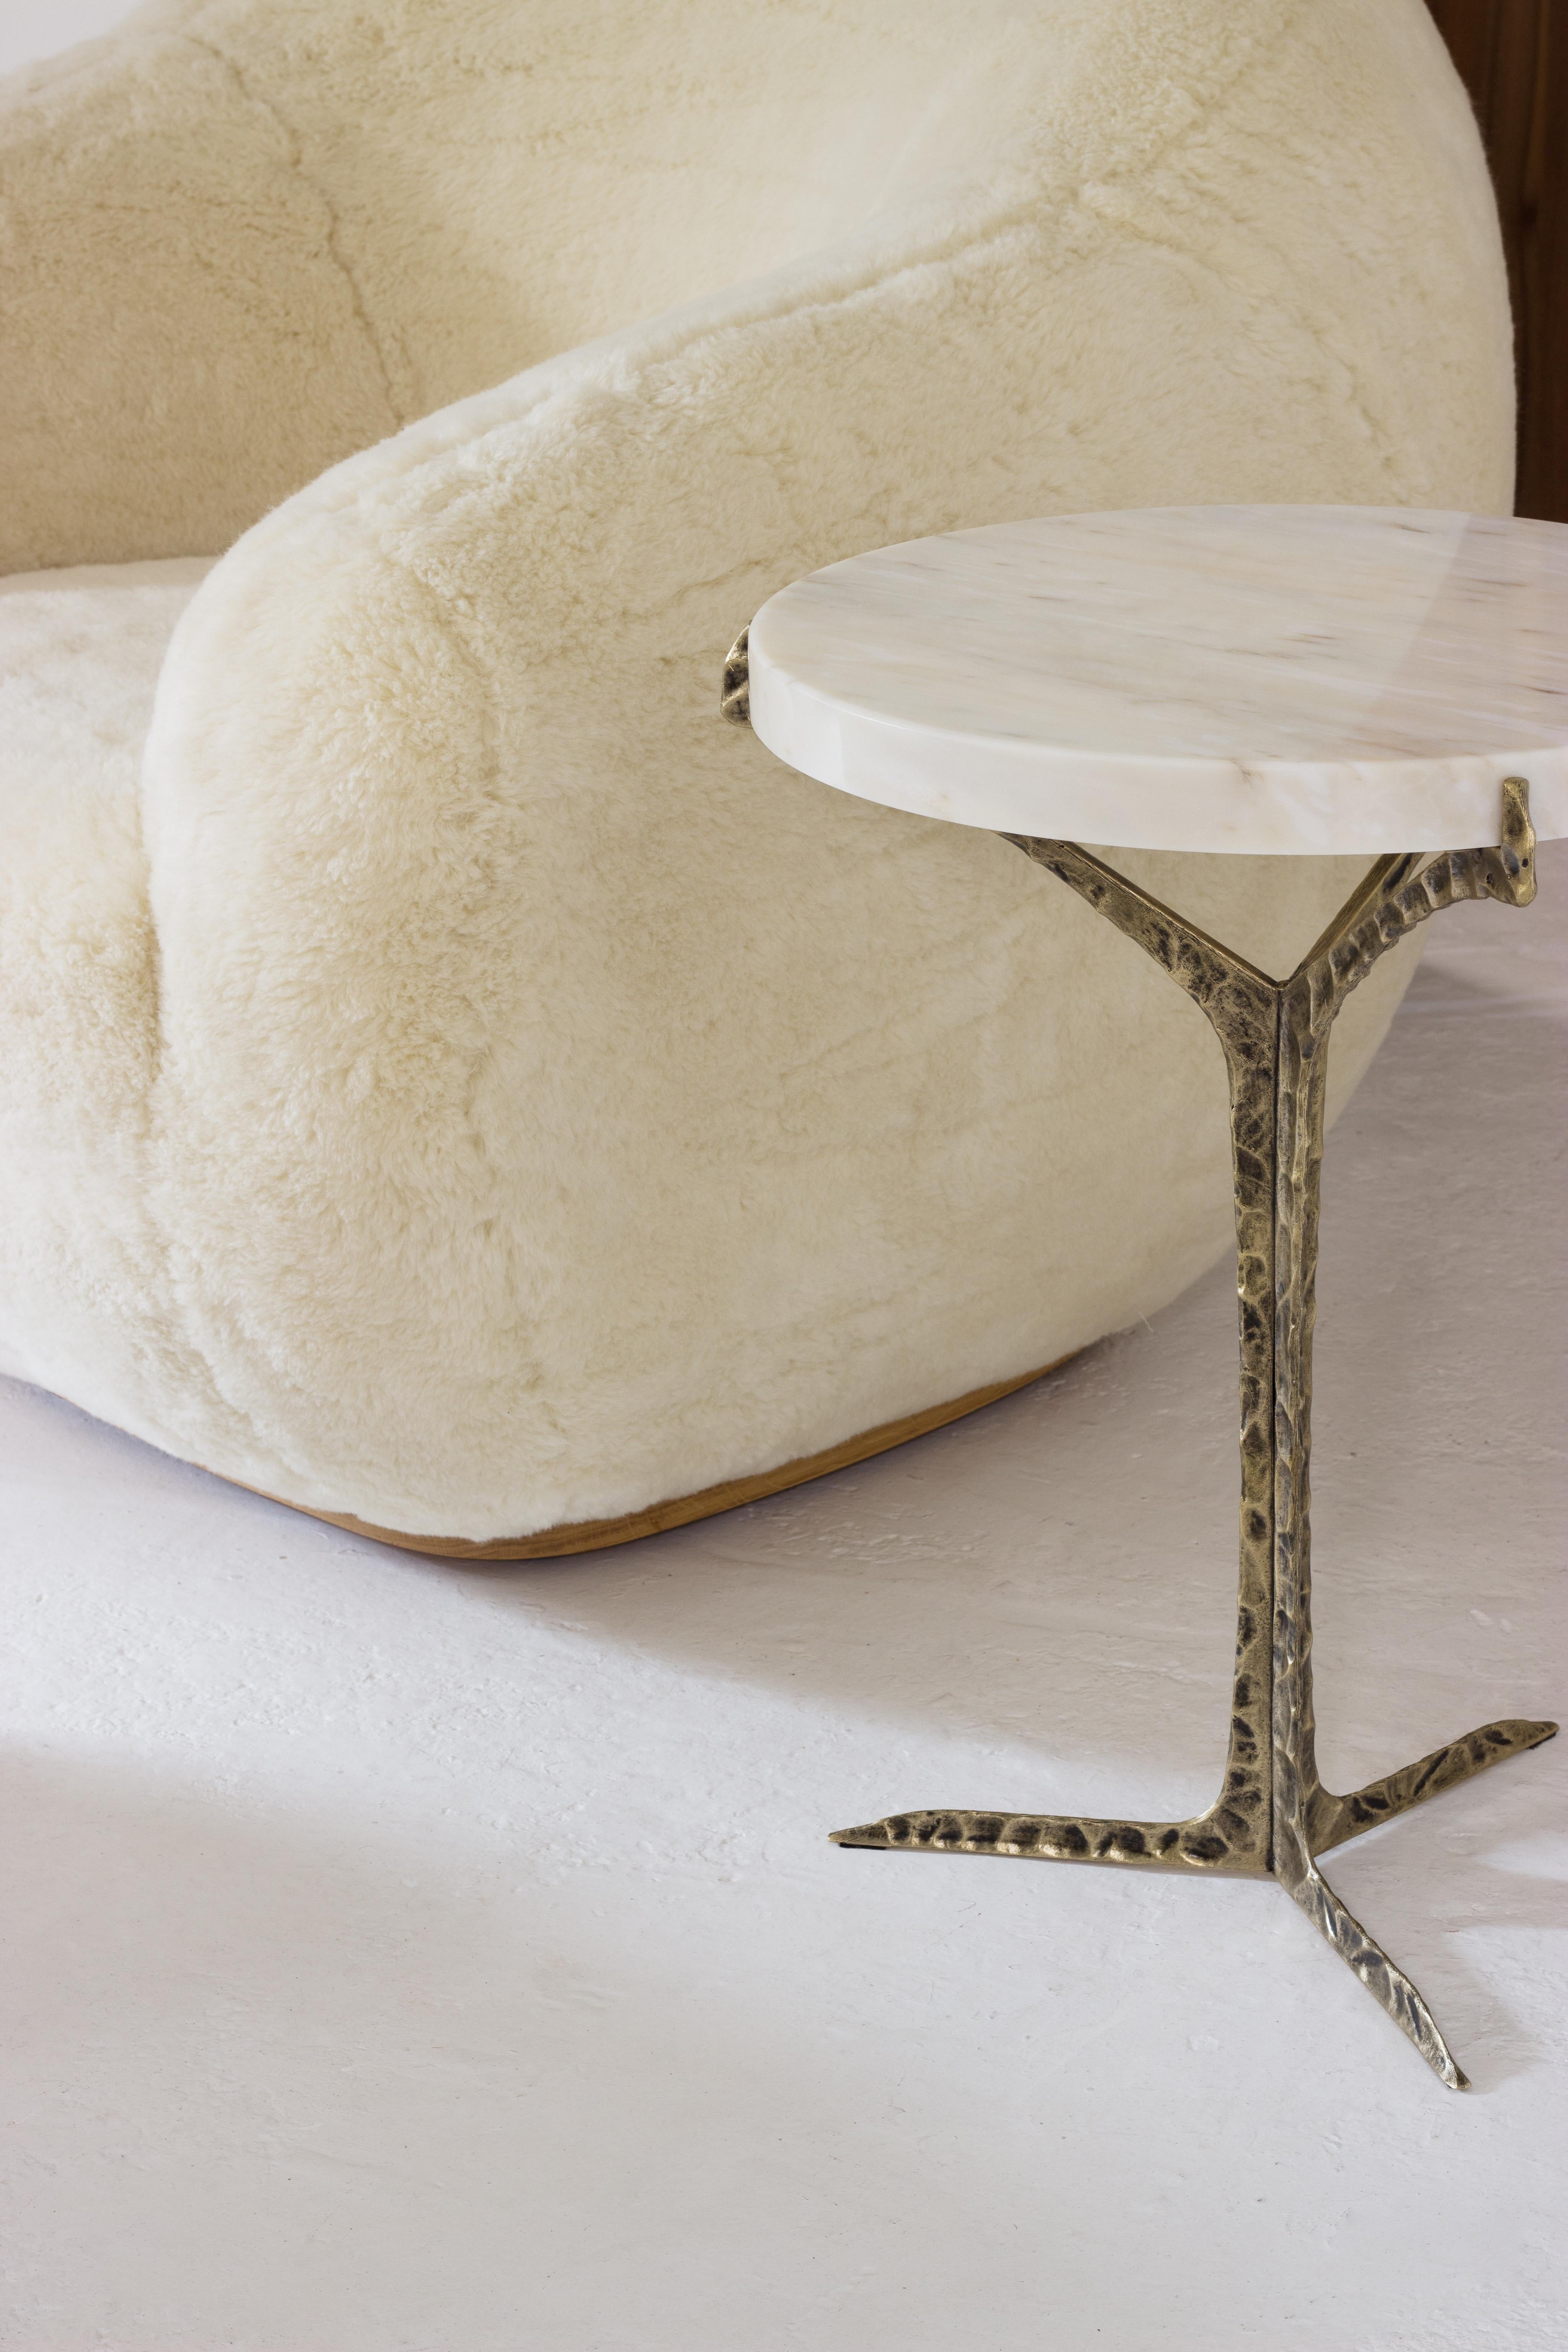 Portuguese Alentejo Side Table, Lacquered & Brass, InsidherLand by Joana Santos Barbosa For Sale